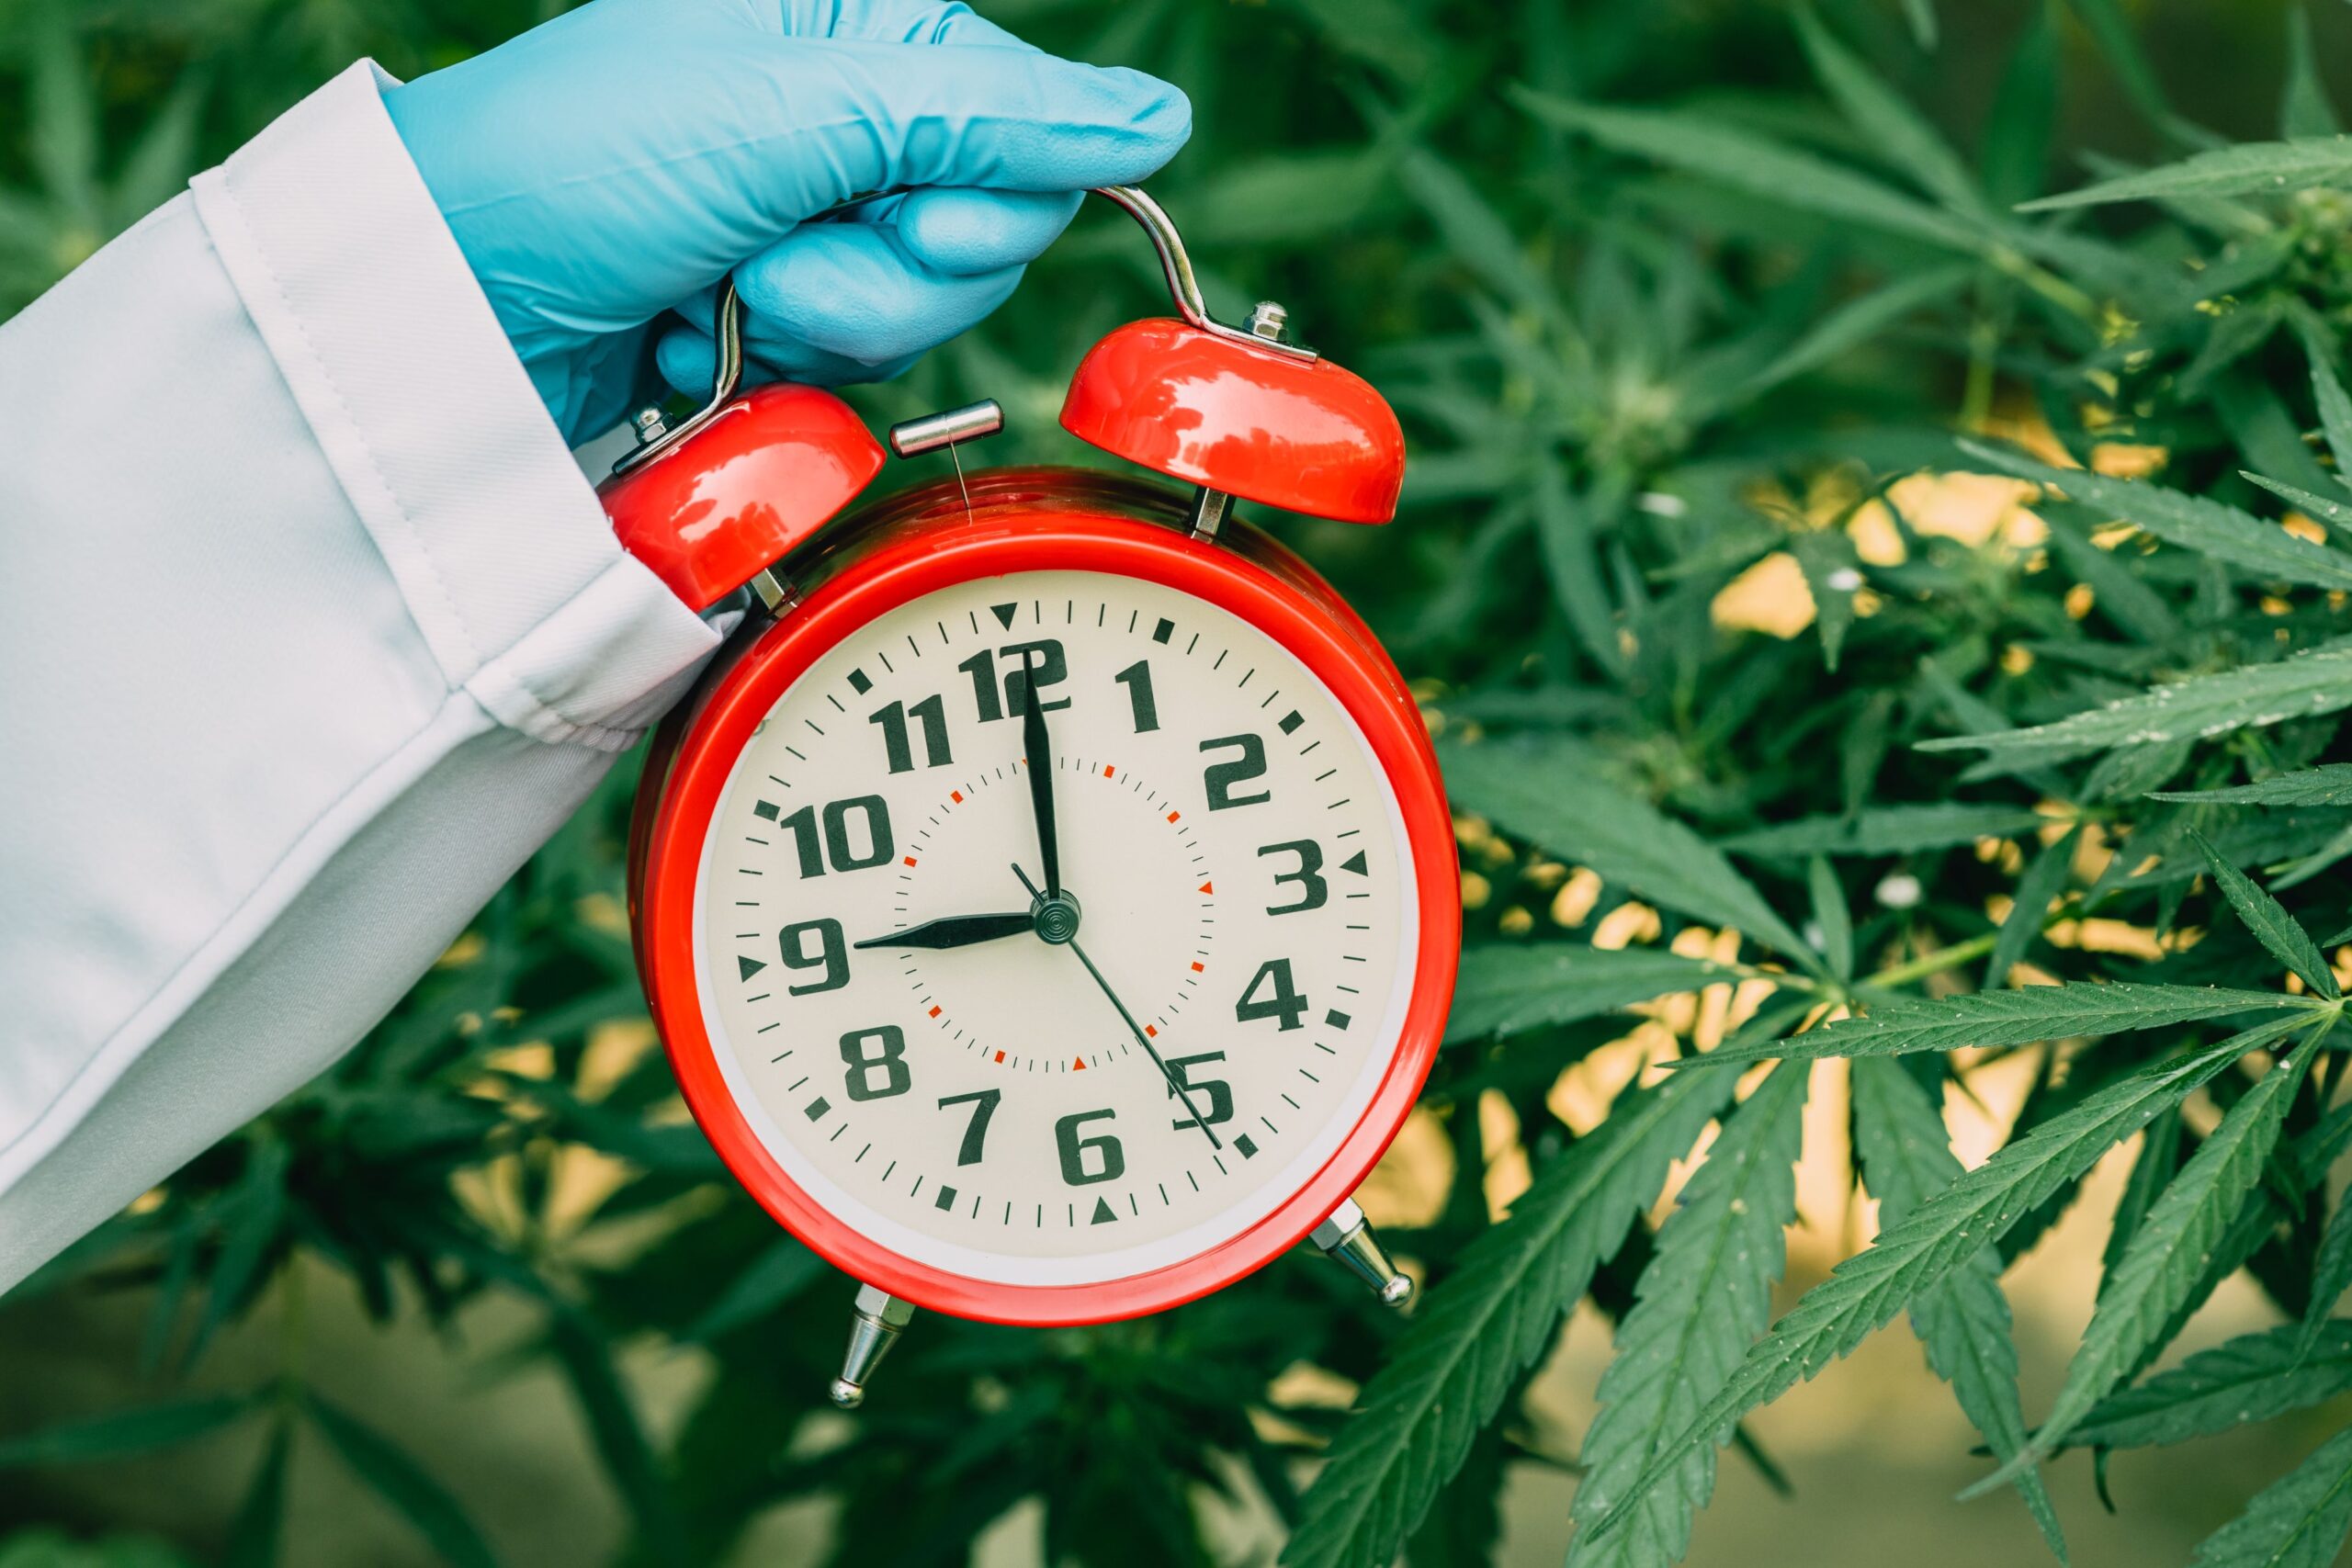 A hand in sterile gloves holding an analog alarm clock next to cannabis plants